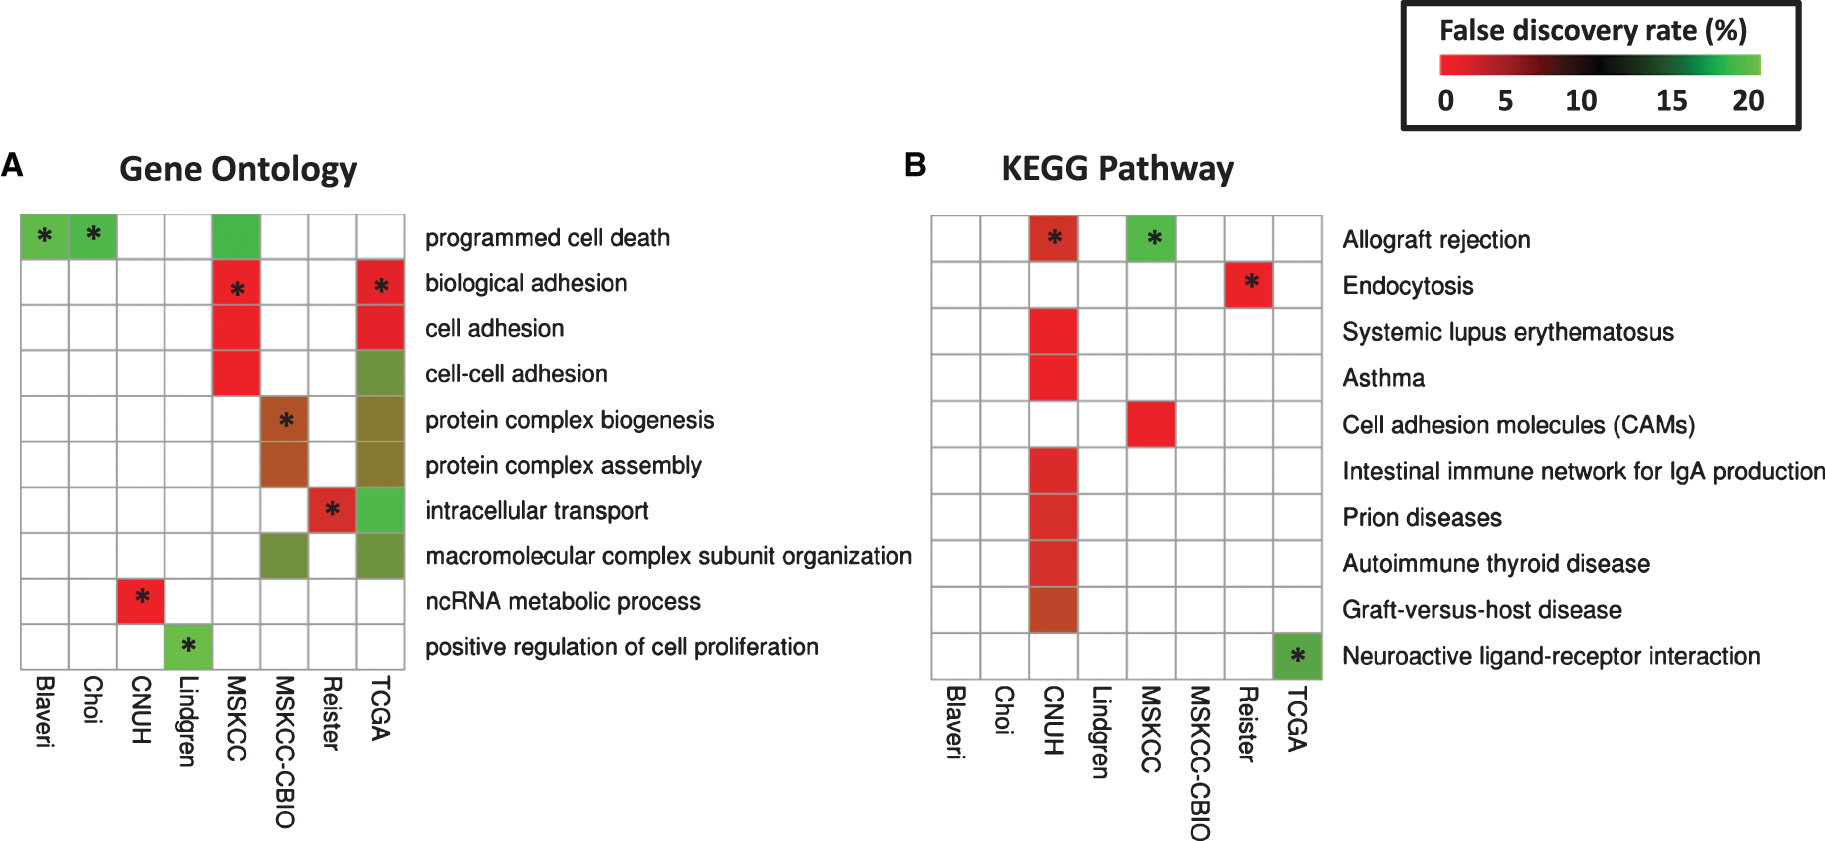 
          Prognostic modules associated with outcome in bladder cancer patients with high-grade, muscle invasive tumors. In each cohort, (A) over-represented Gene Ontology (GO) terms and (B) KEGG pathways were identified from lists of genes significantly predictive of disease outcome (P <  0.01) using the DAVID gene annotation enrichment analysis toolkit. Consistently prognostic modules were identified by ranking all modules first by the number of cohorts with significant results (FDR <  20% ) and then by average p-value. Each figure includes ten modules: the most consistently prognostic modules and the ‘top hit’ for each cohort, marked by an asterisk (*), which is defined as the module with the lowest FDR in that cohort that has an FDR <  20% in multiple cohorts, or if no such module exists, then the module with the lowest FDR.
        